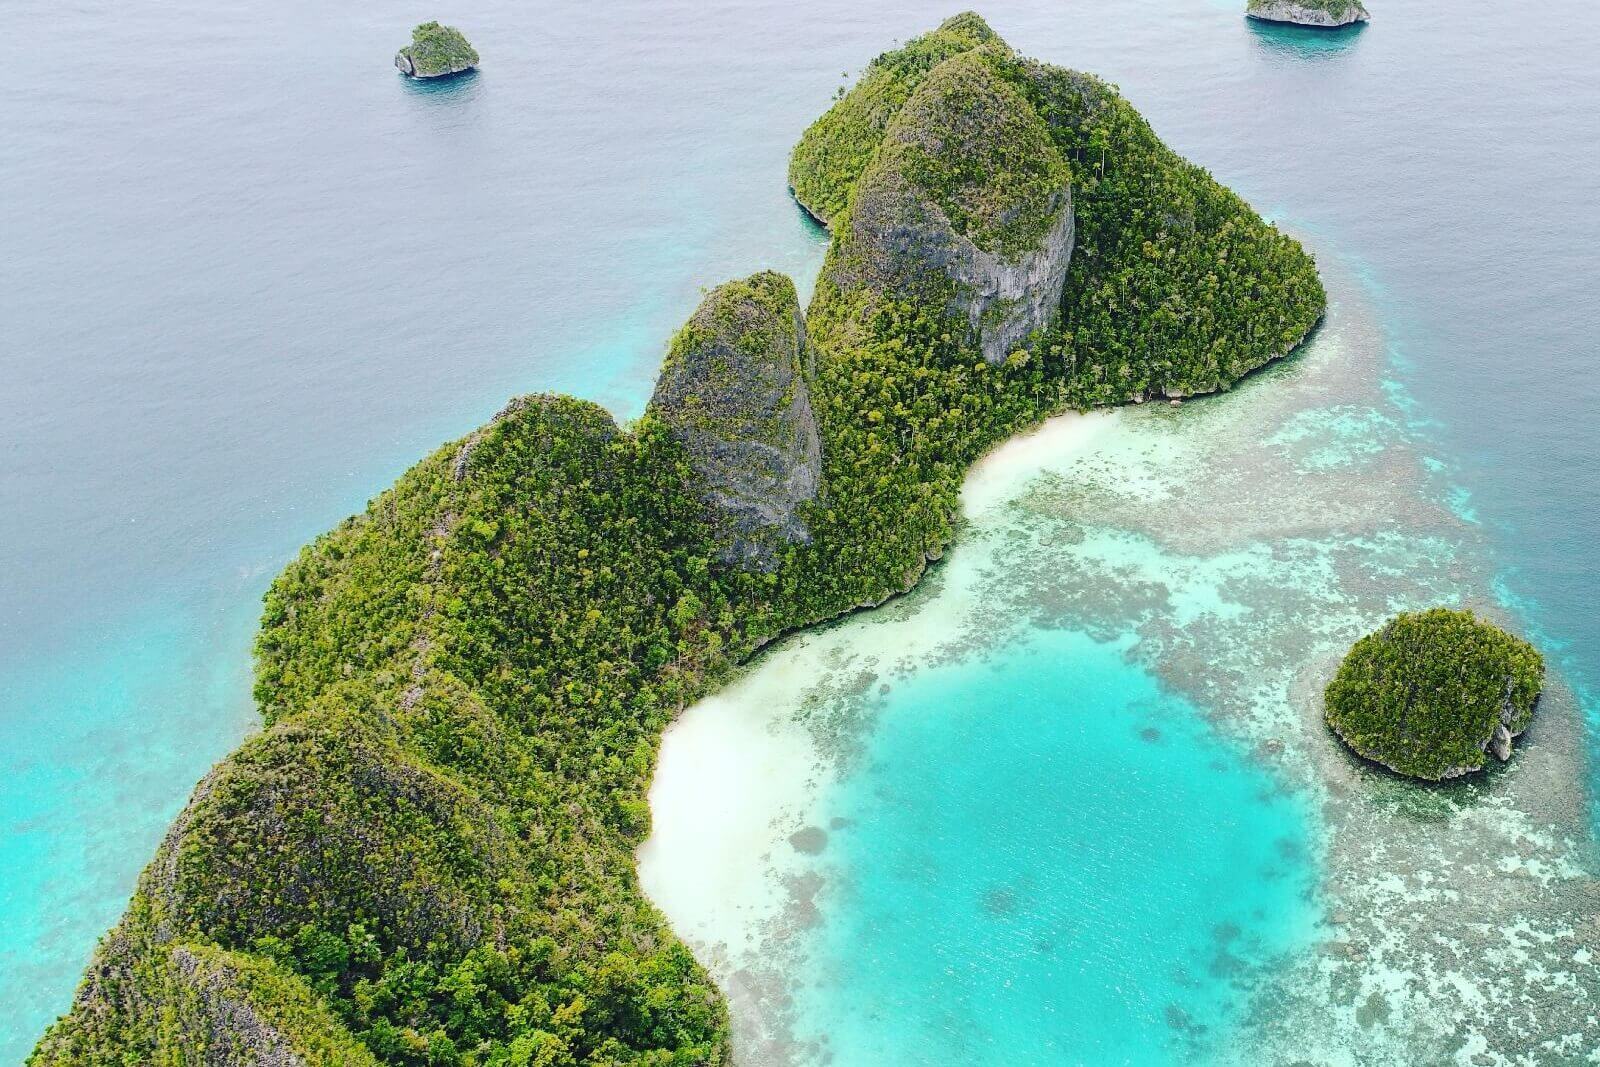 Take a Look at These 10 Jaw-Dropping Photos of Raja Ampat